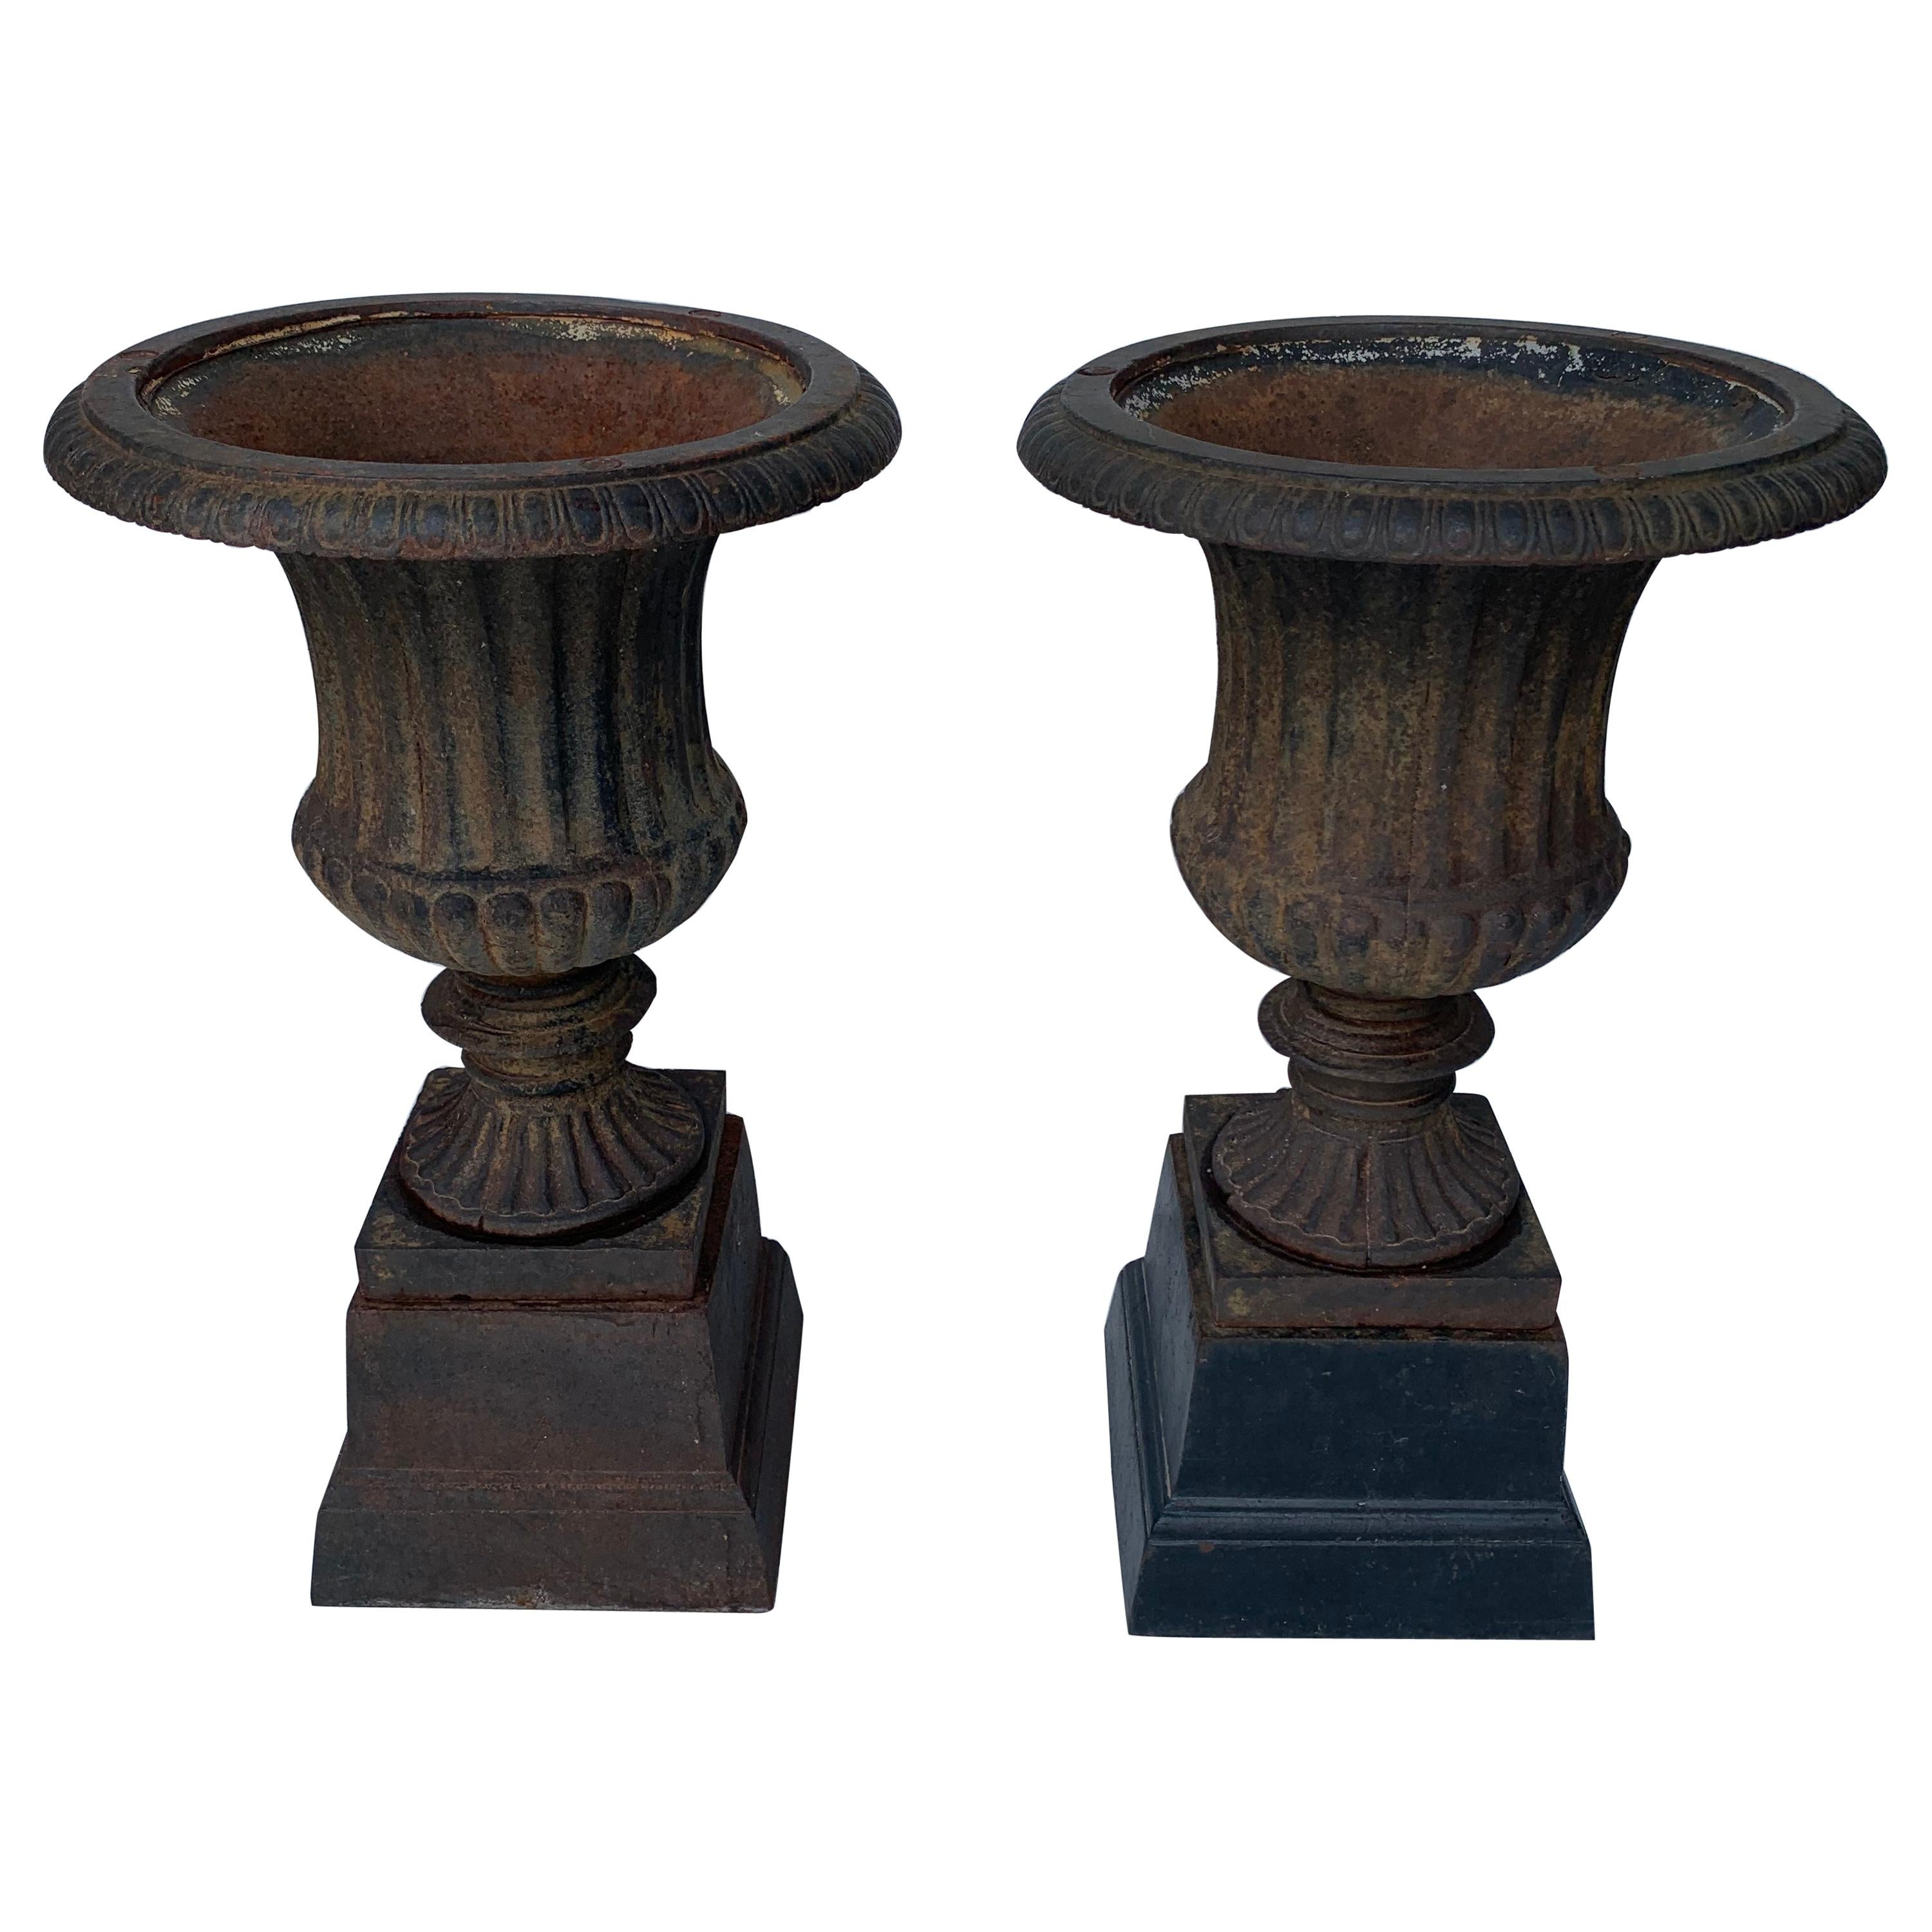 Pair Of Small Late 19th Century Cast Iron Urns On Stands